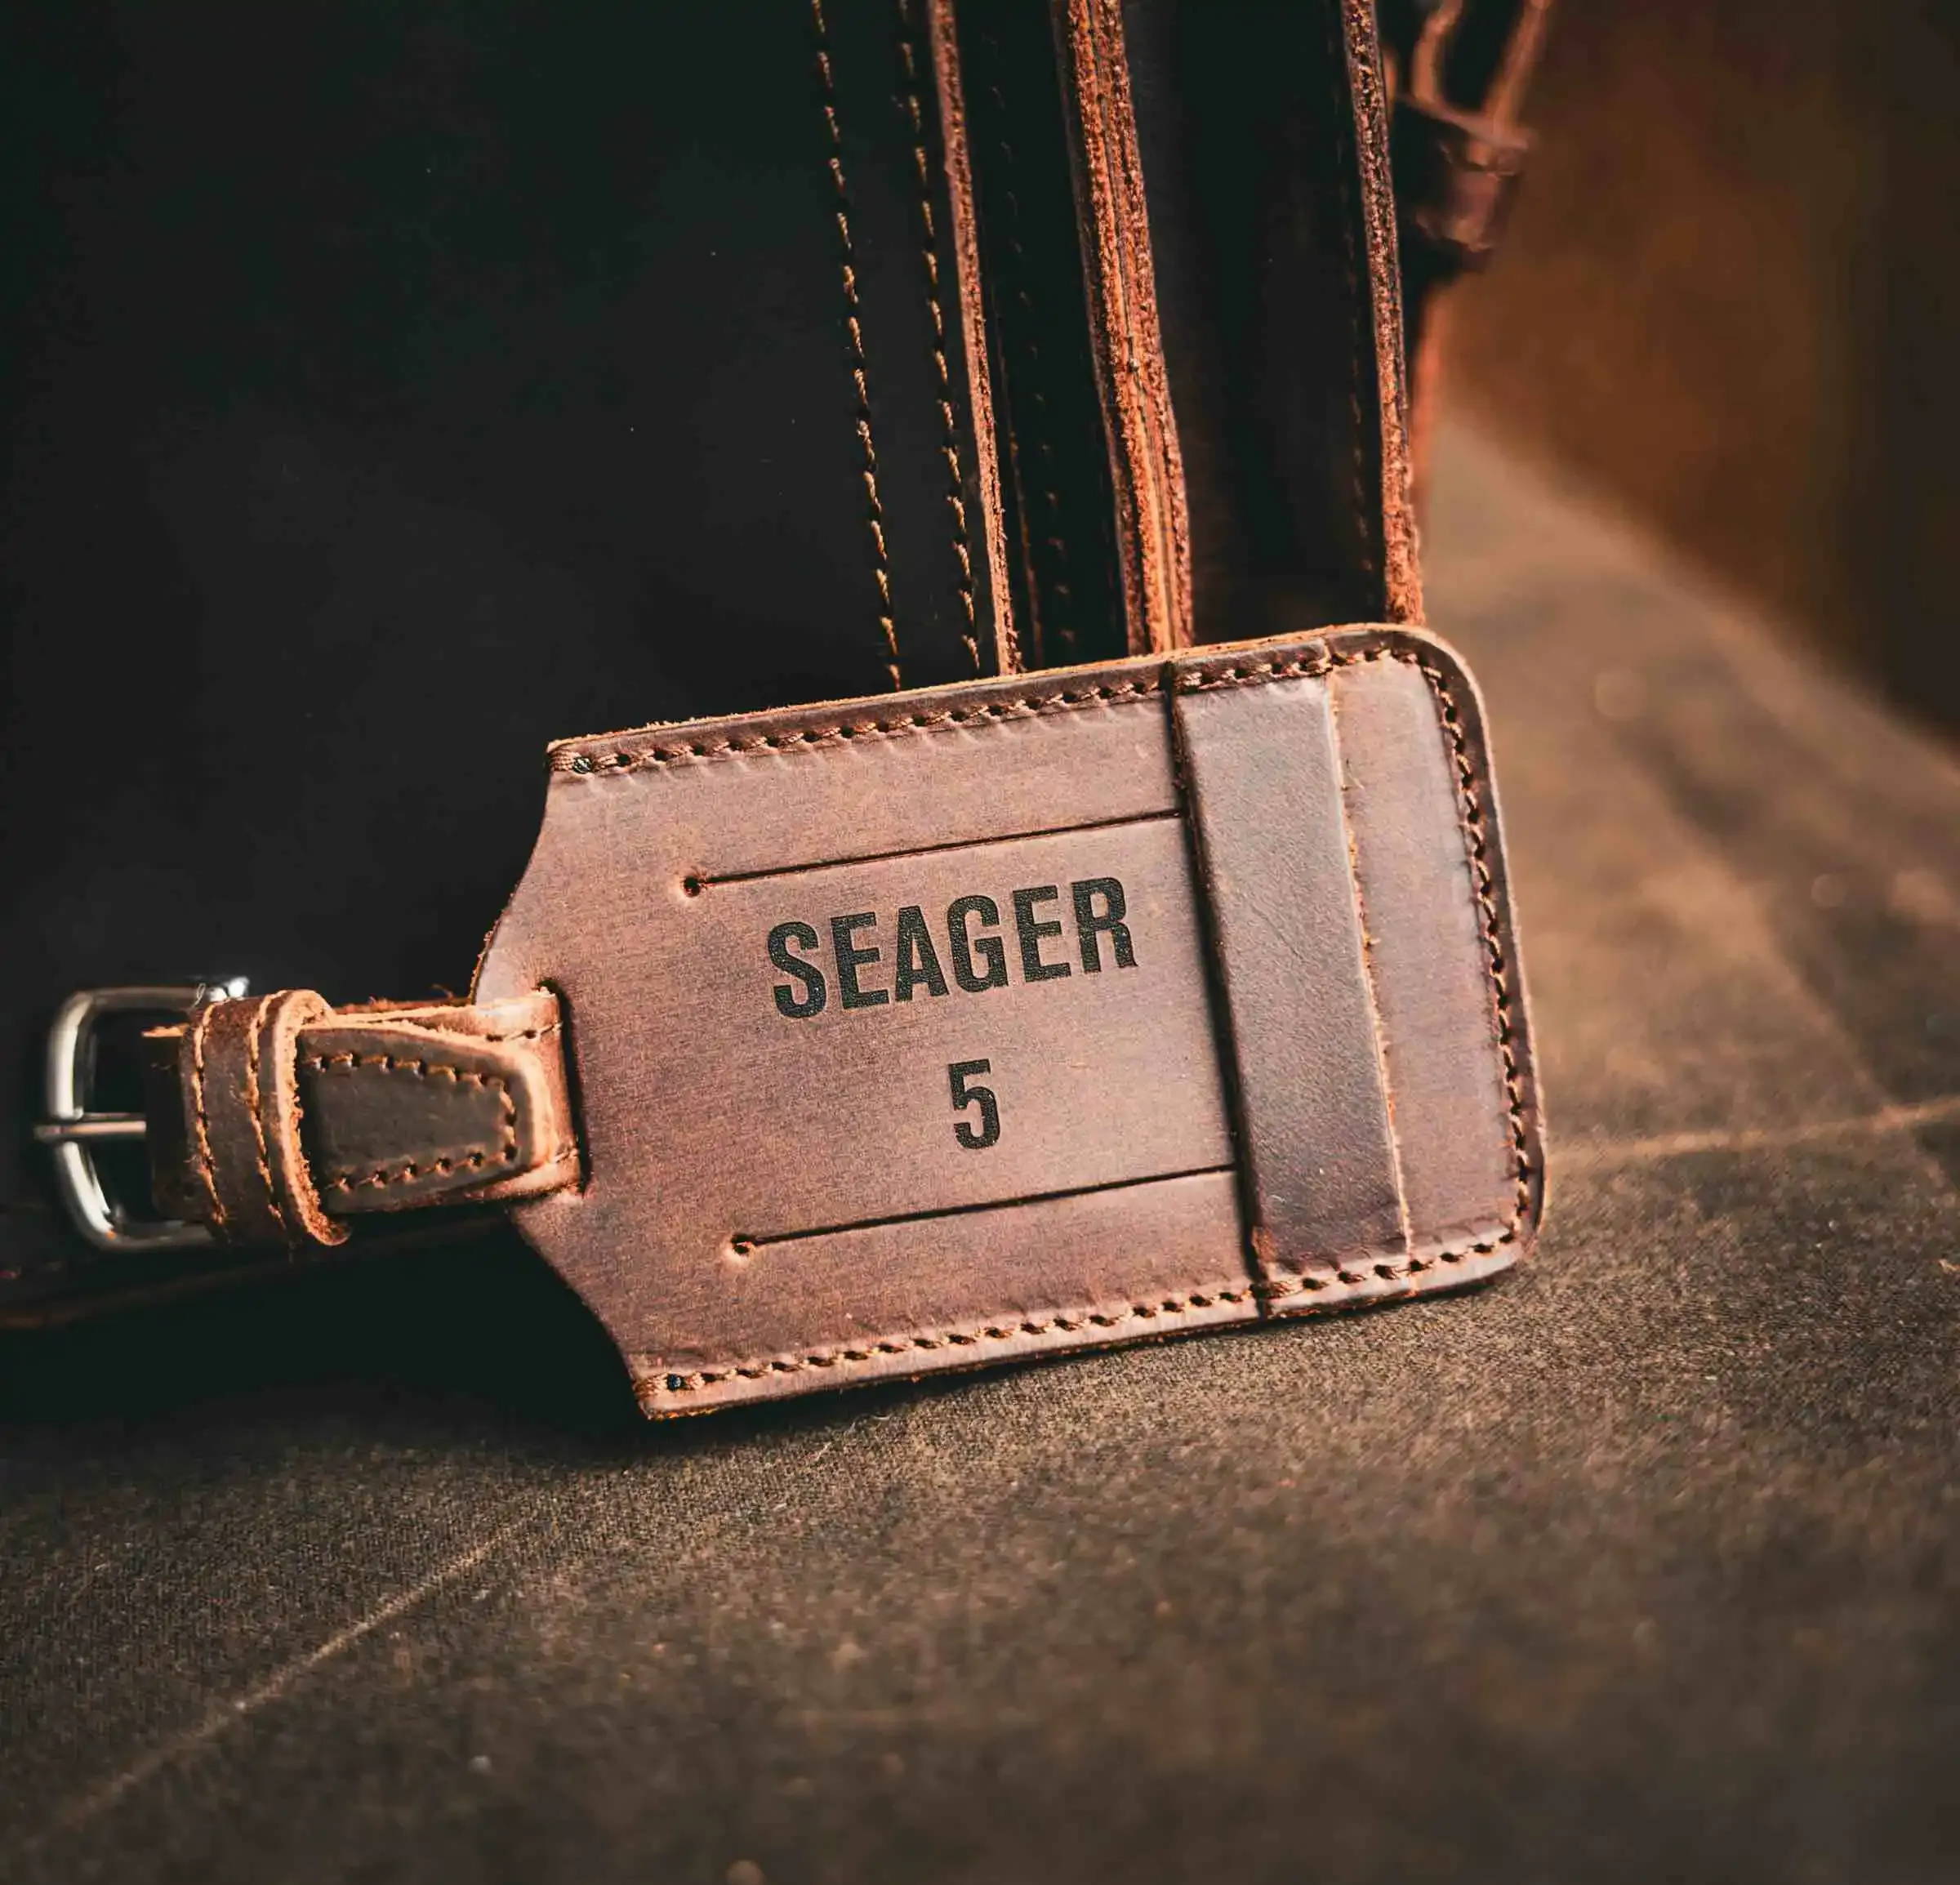 Custom Leather Luggage Tag for Corey Seager.